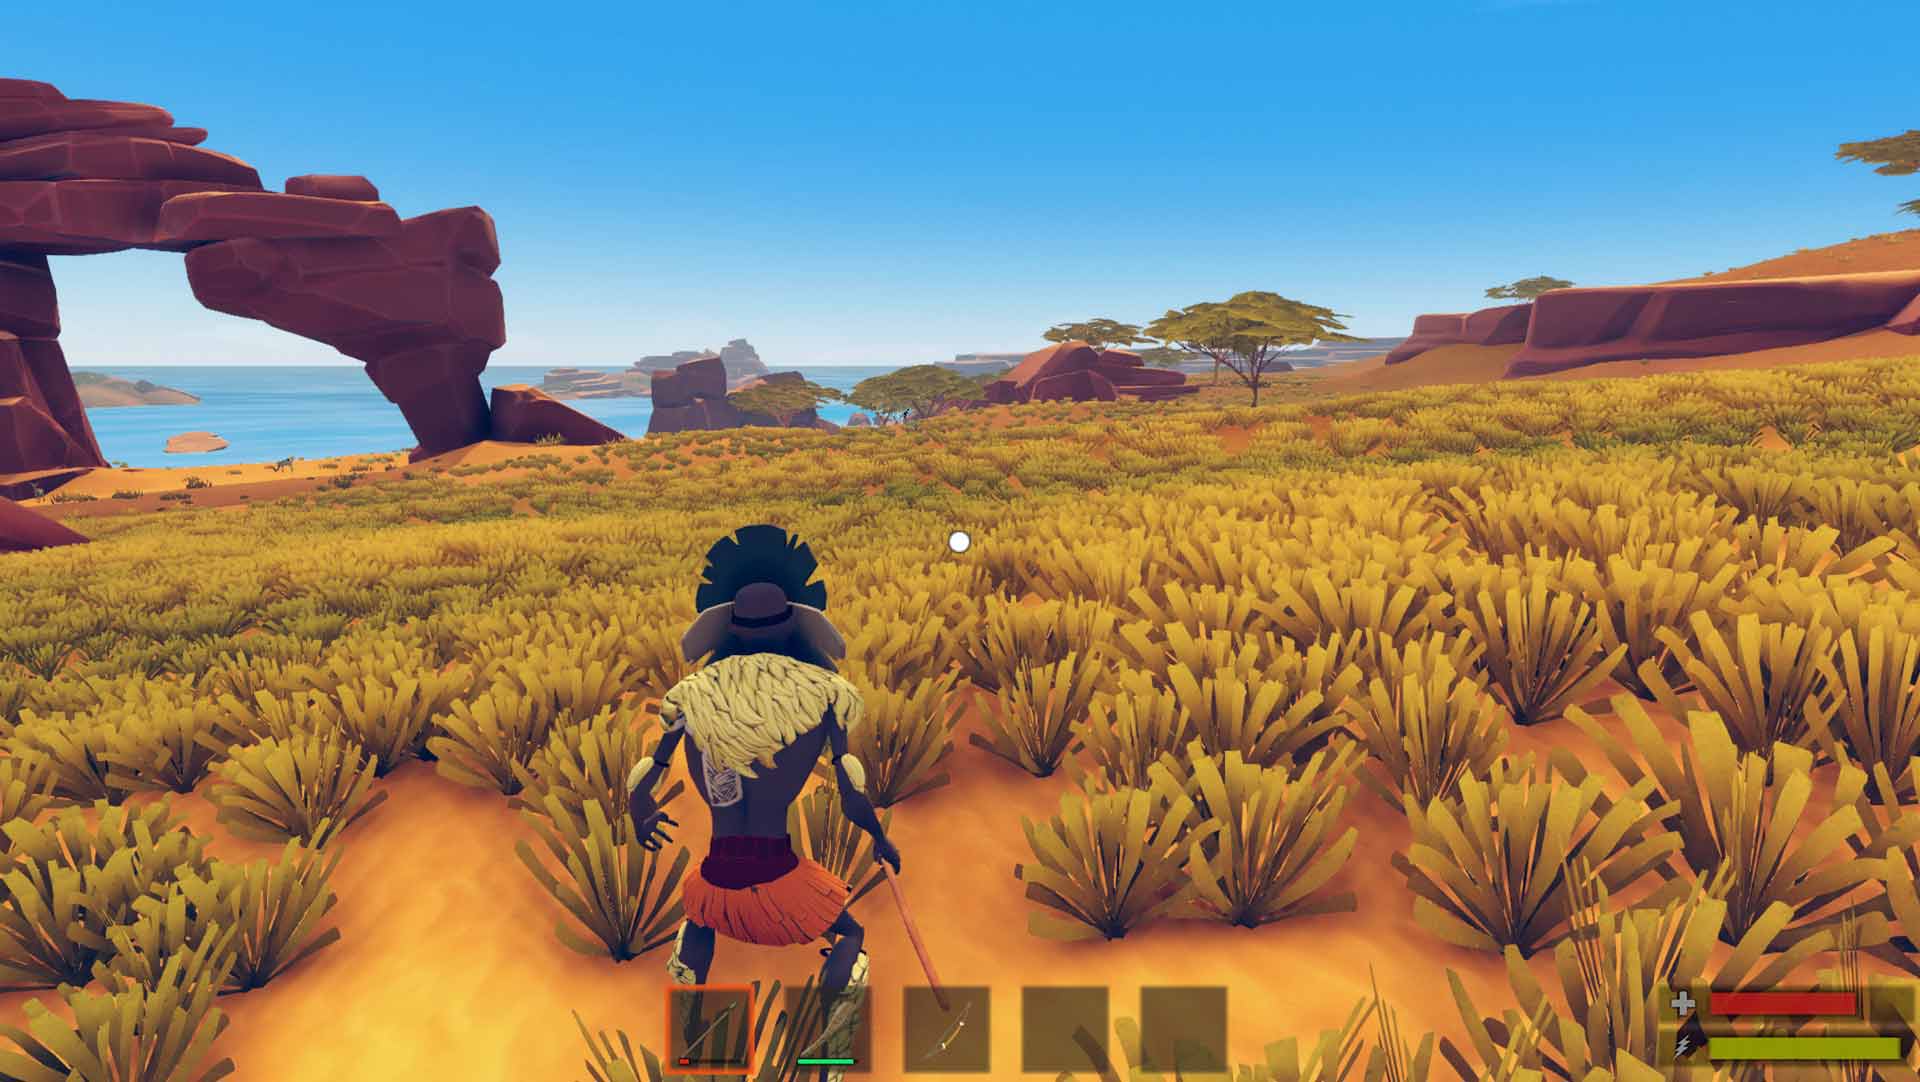 The tribe gameplay. Titans: Dawn of Tribes. Tribes игра. Indiegala игра. Титанс игра на ПК.